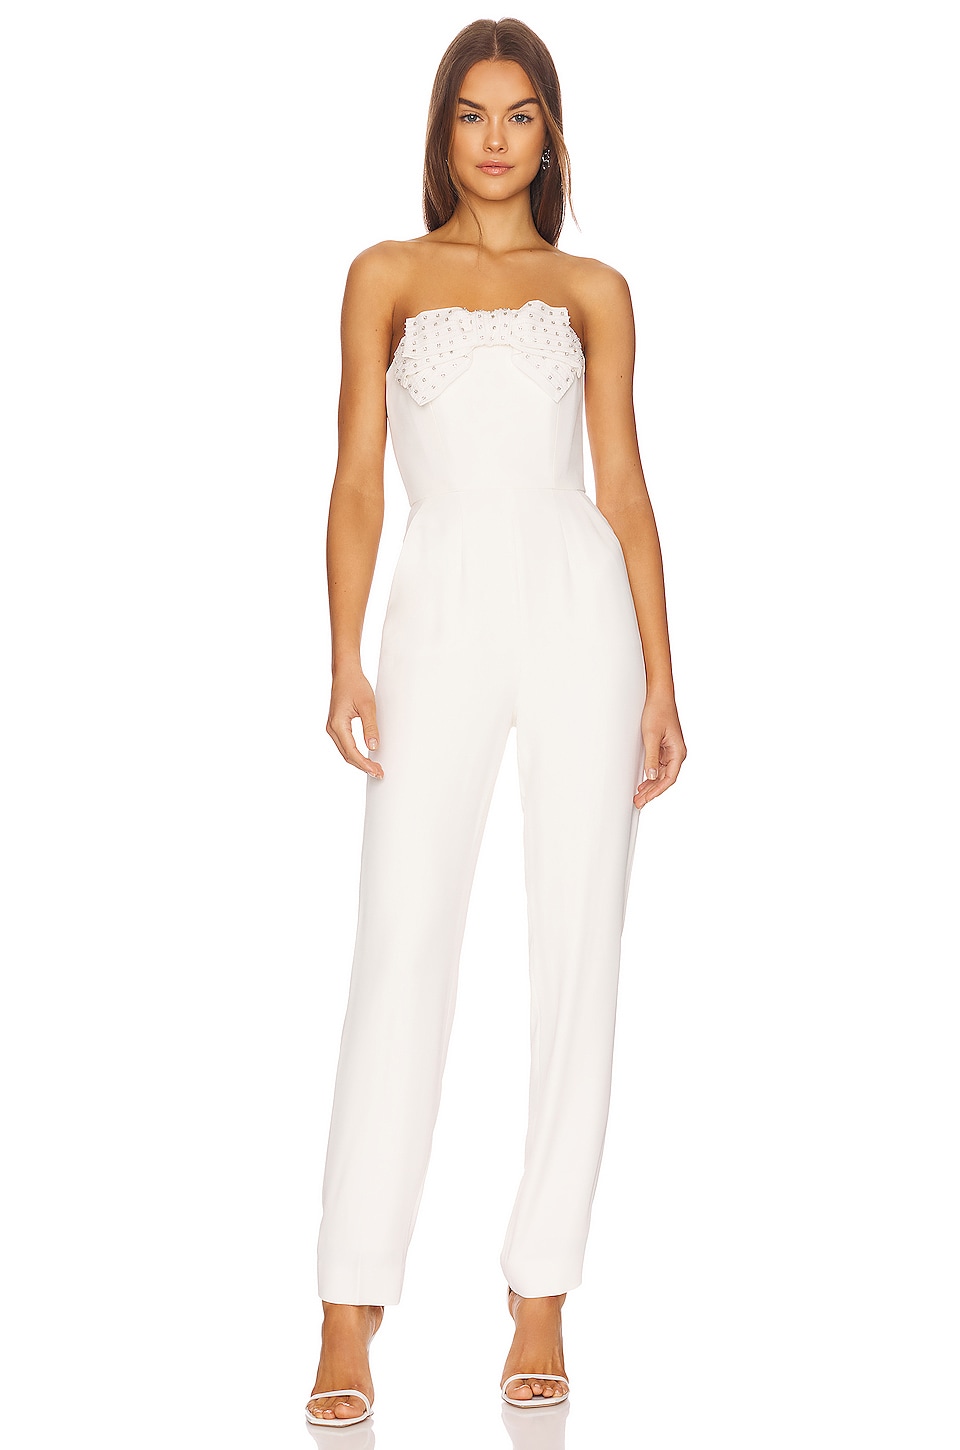 Alexis Lukas Jumpsuit in White | REVOLVE